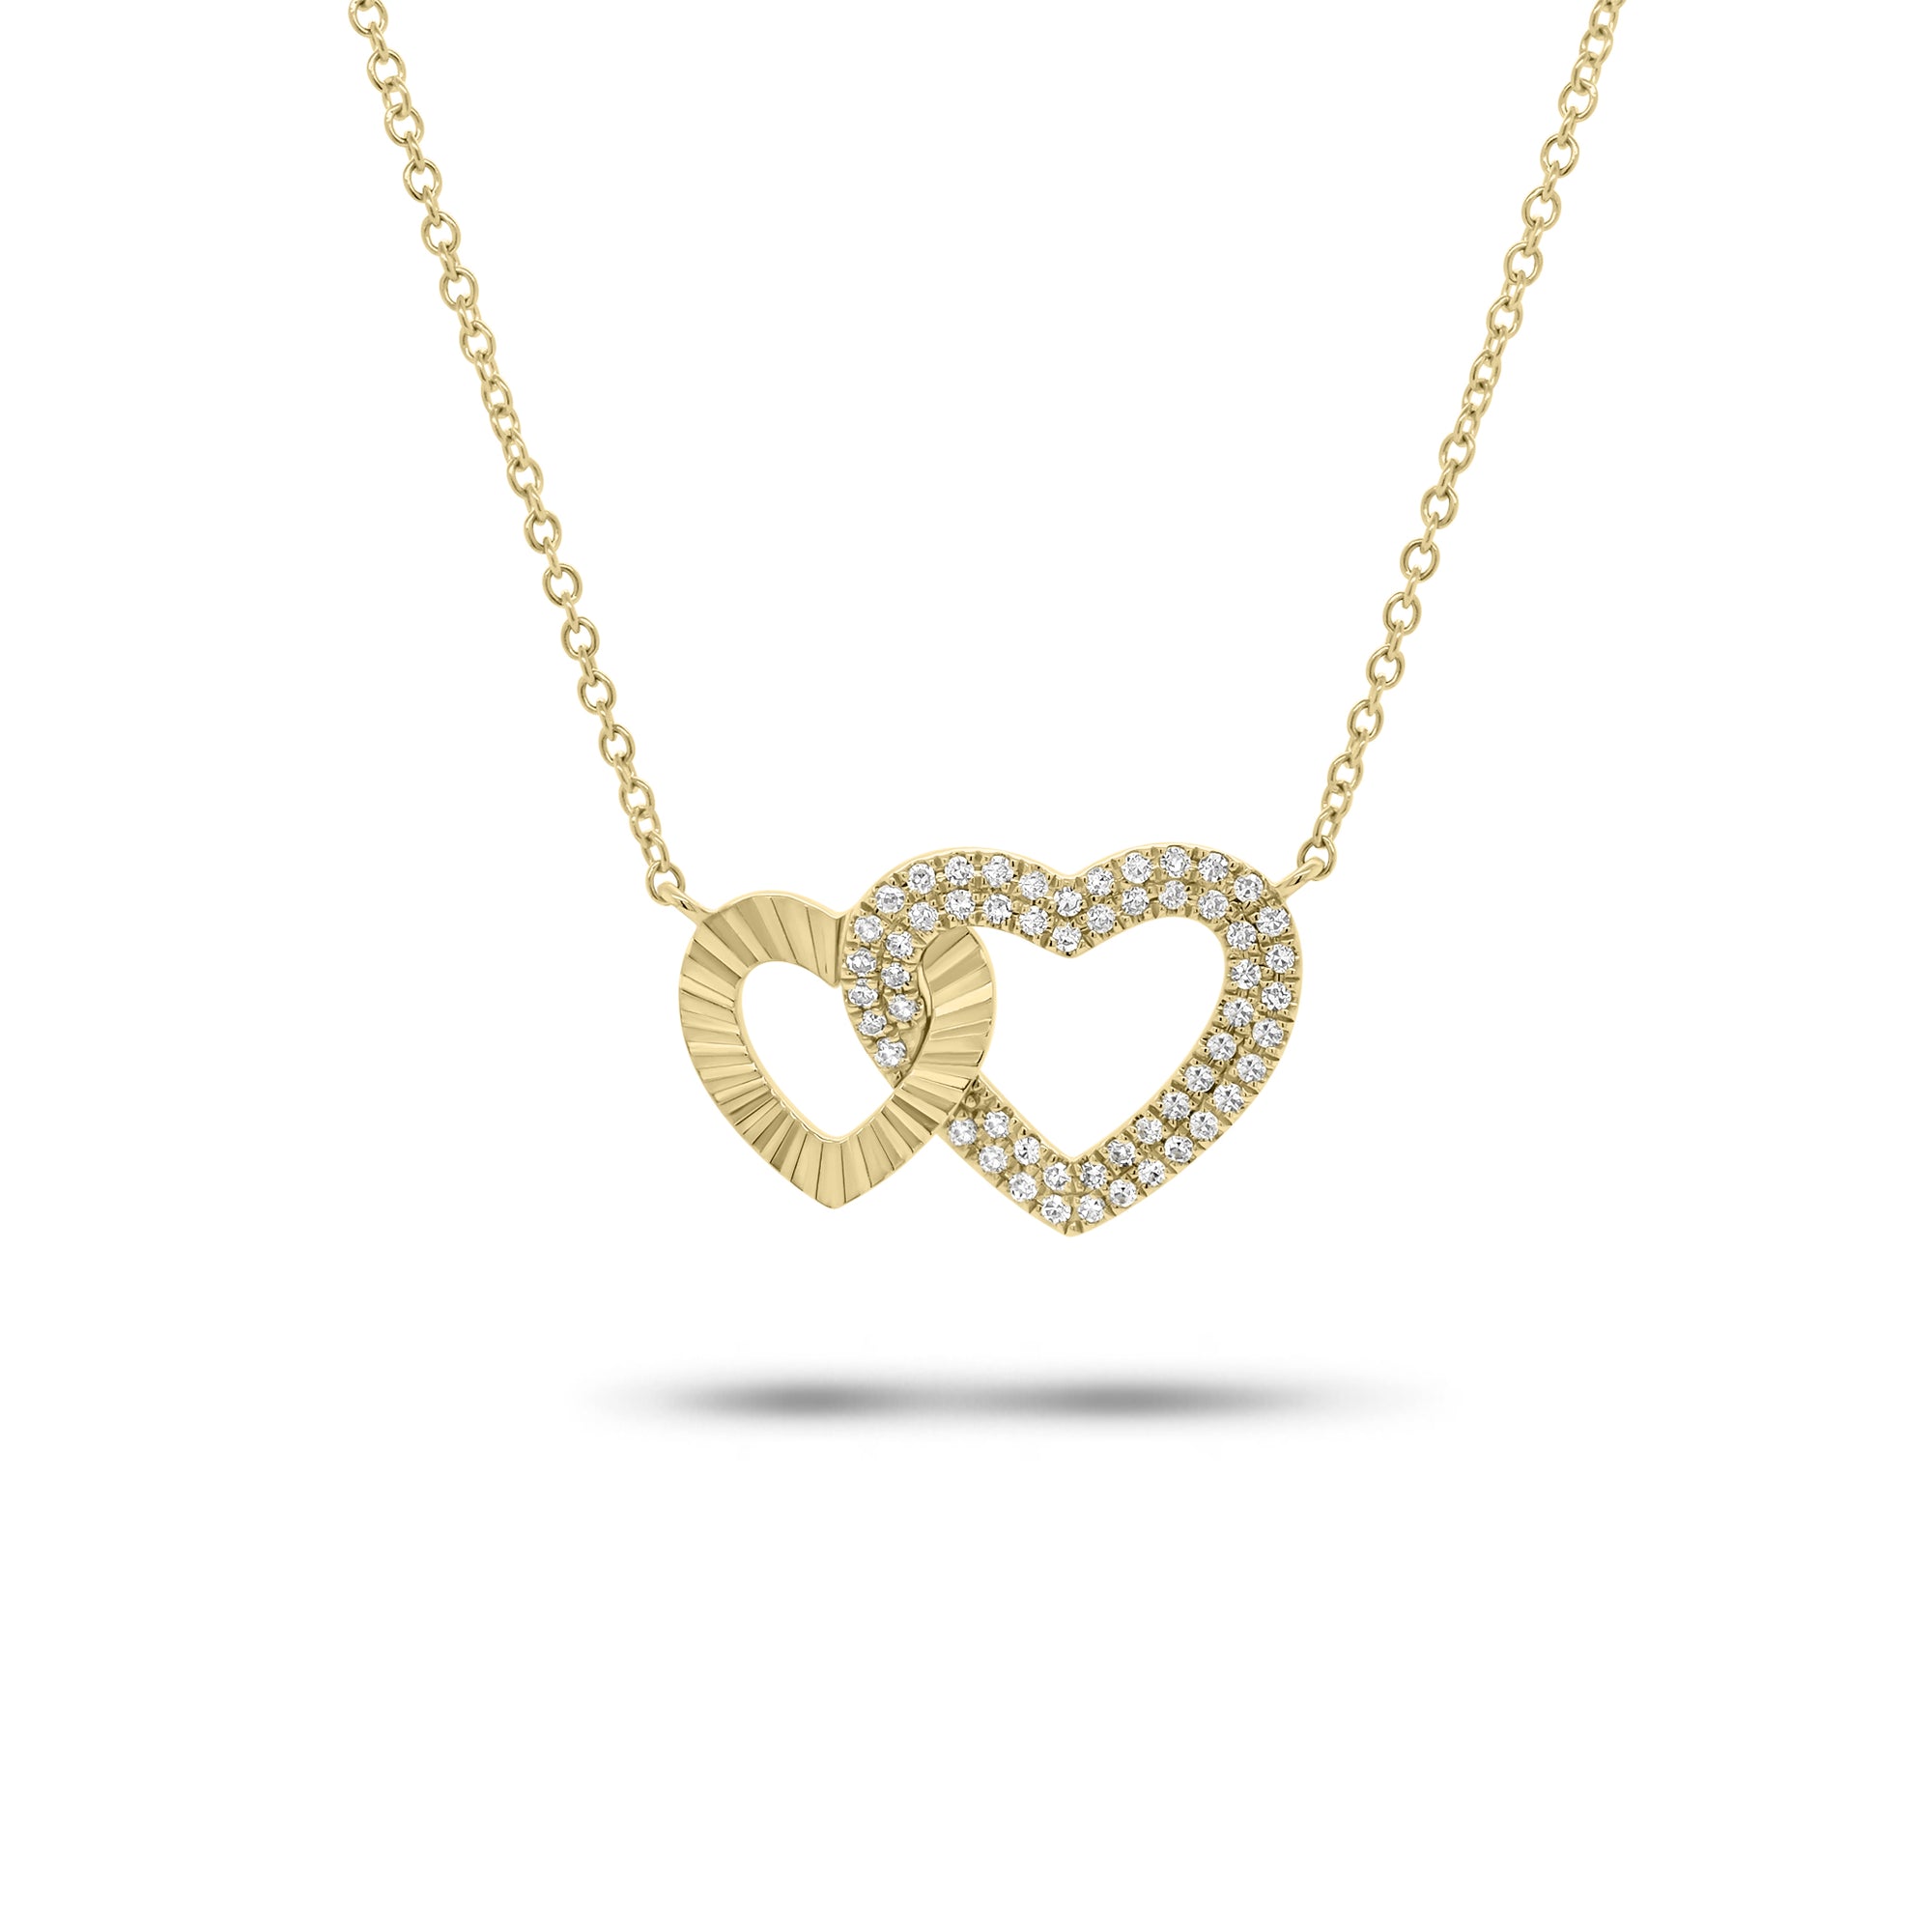 Diamond & Pleated Gold Interlocking Hearts Pendant Necklace - 14K gold weighing 2.66 grams  - 55 round diamonds weighing 0.14 carats